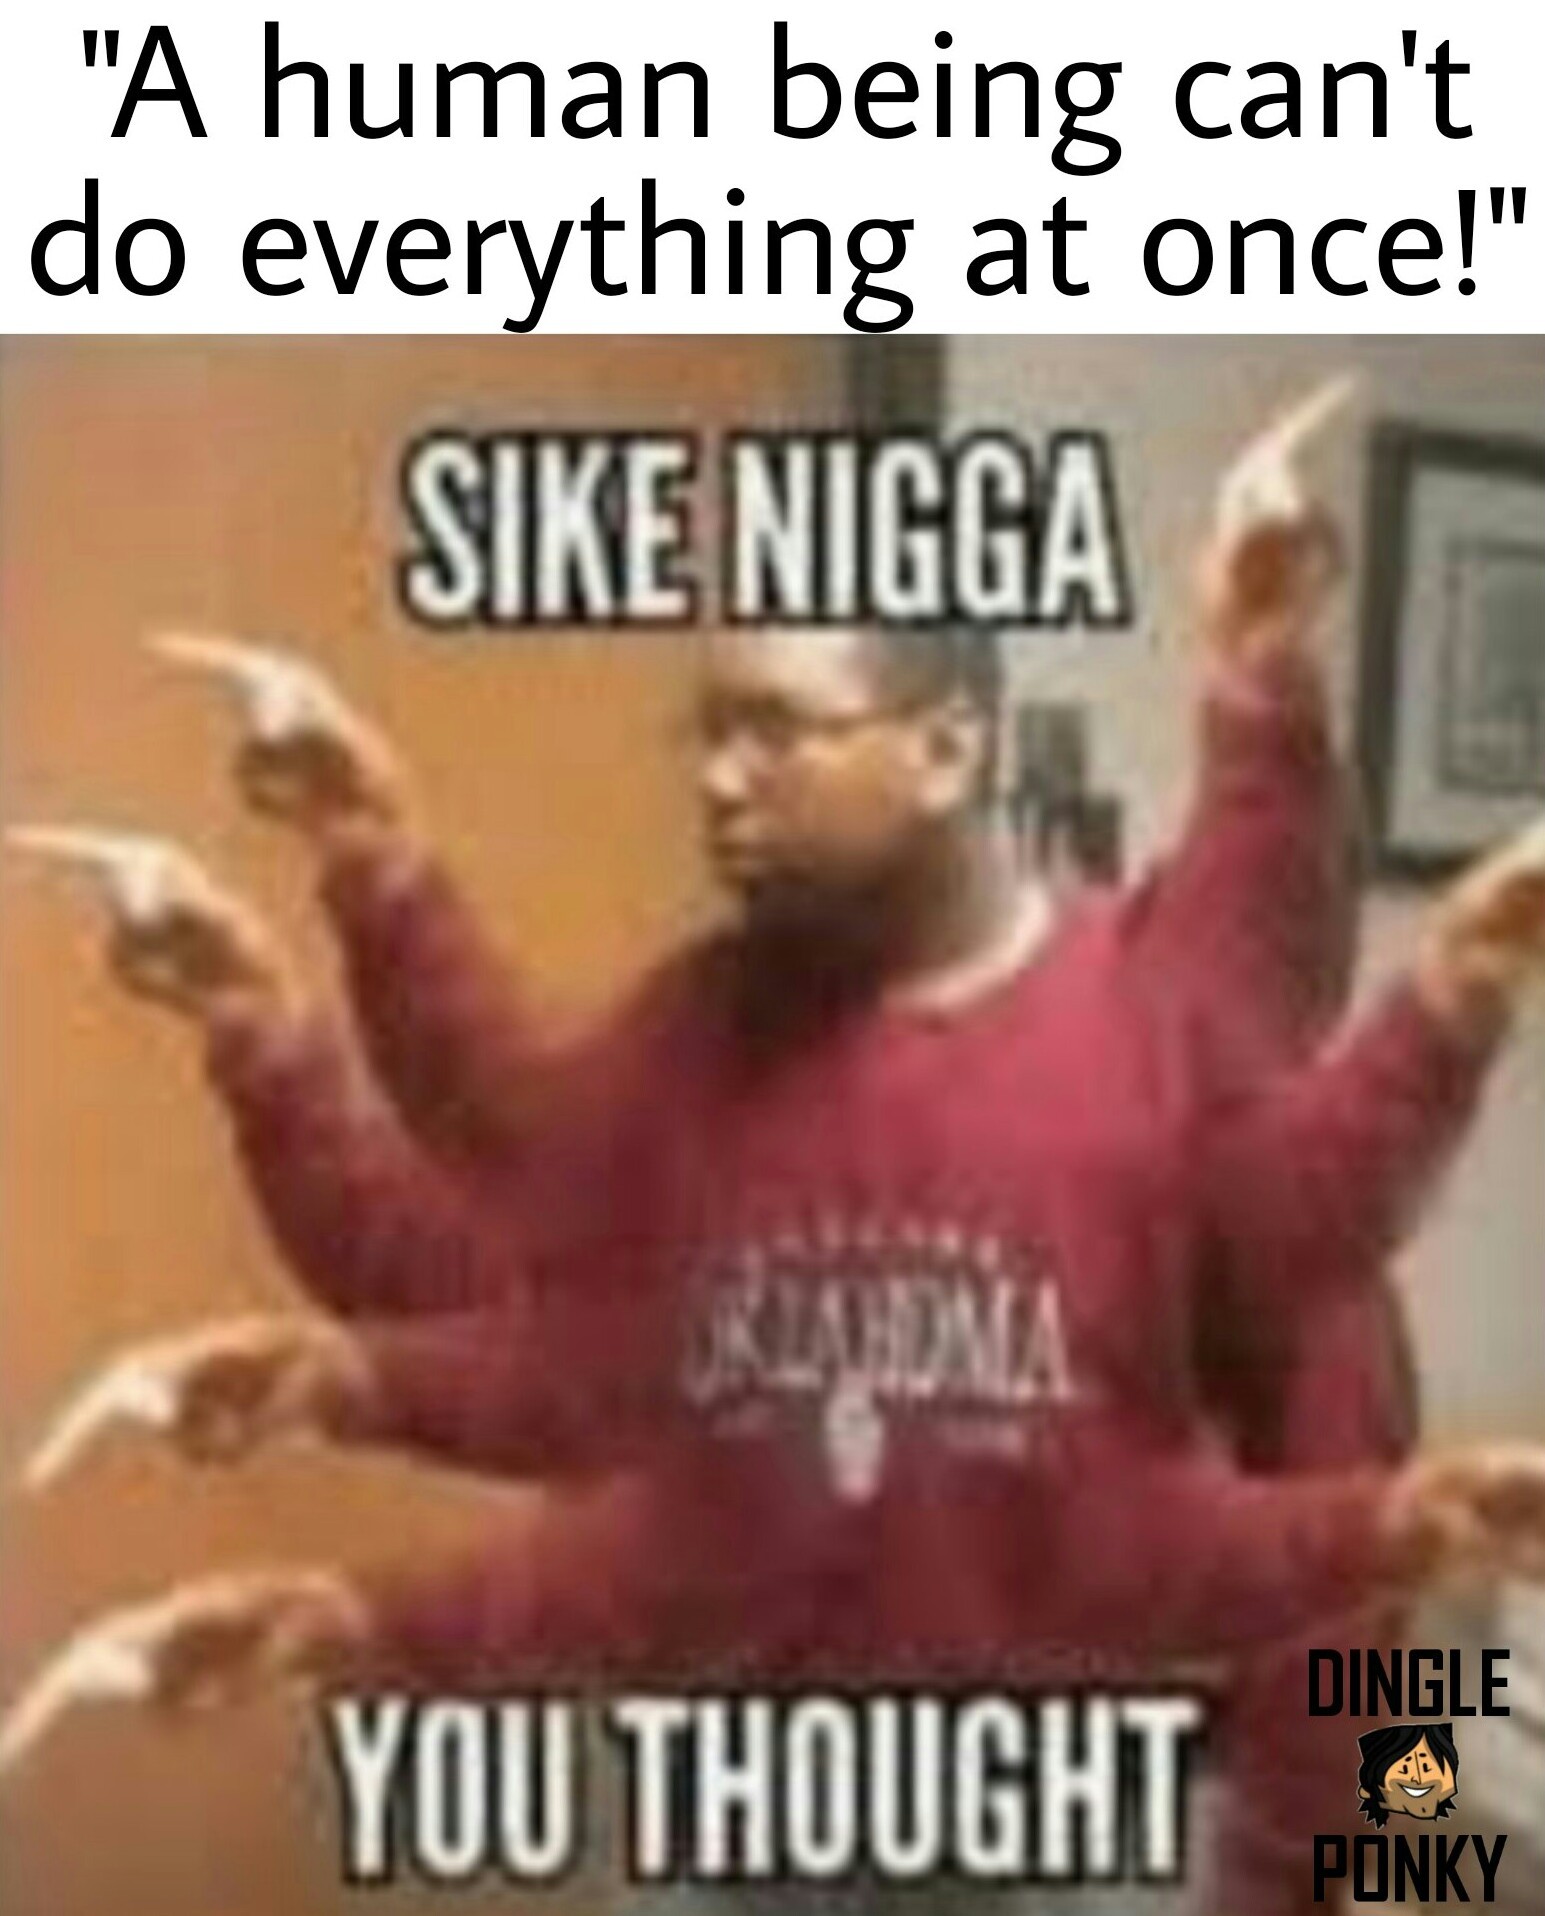 Sorry that the sike nigga picture is quite blurry, best one I could find. -...